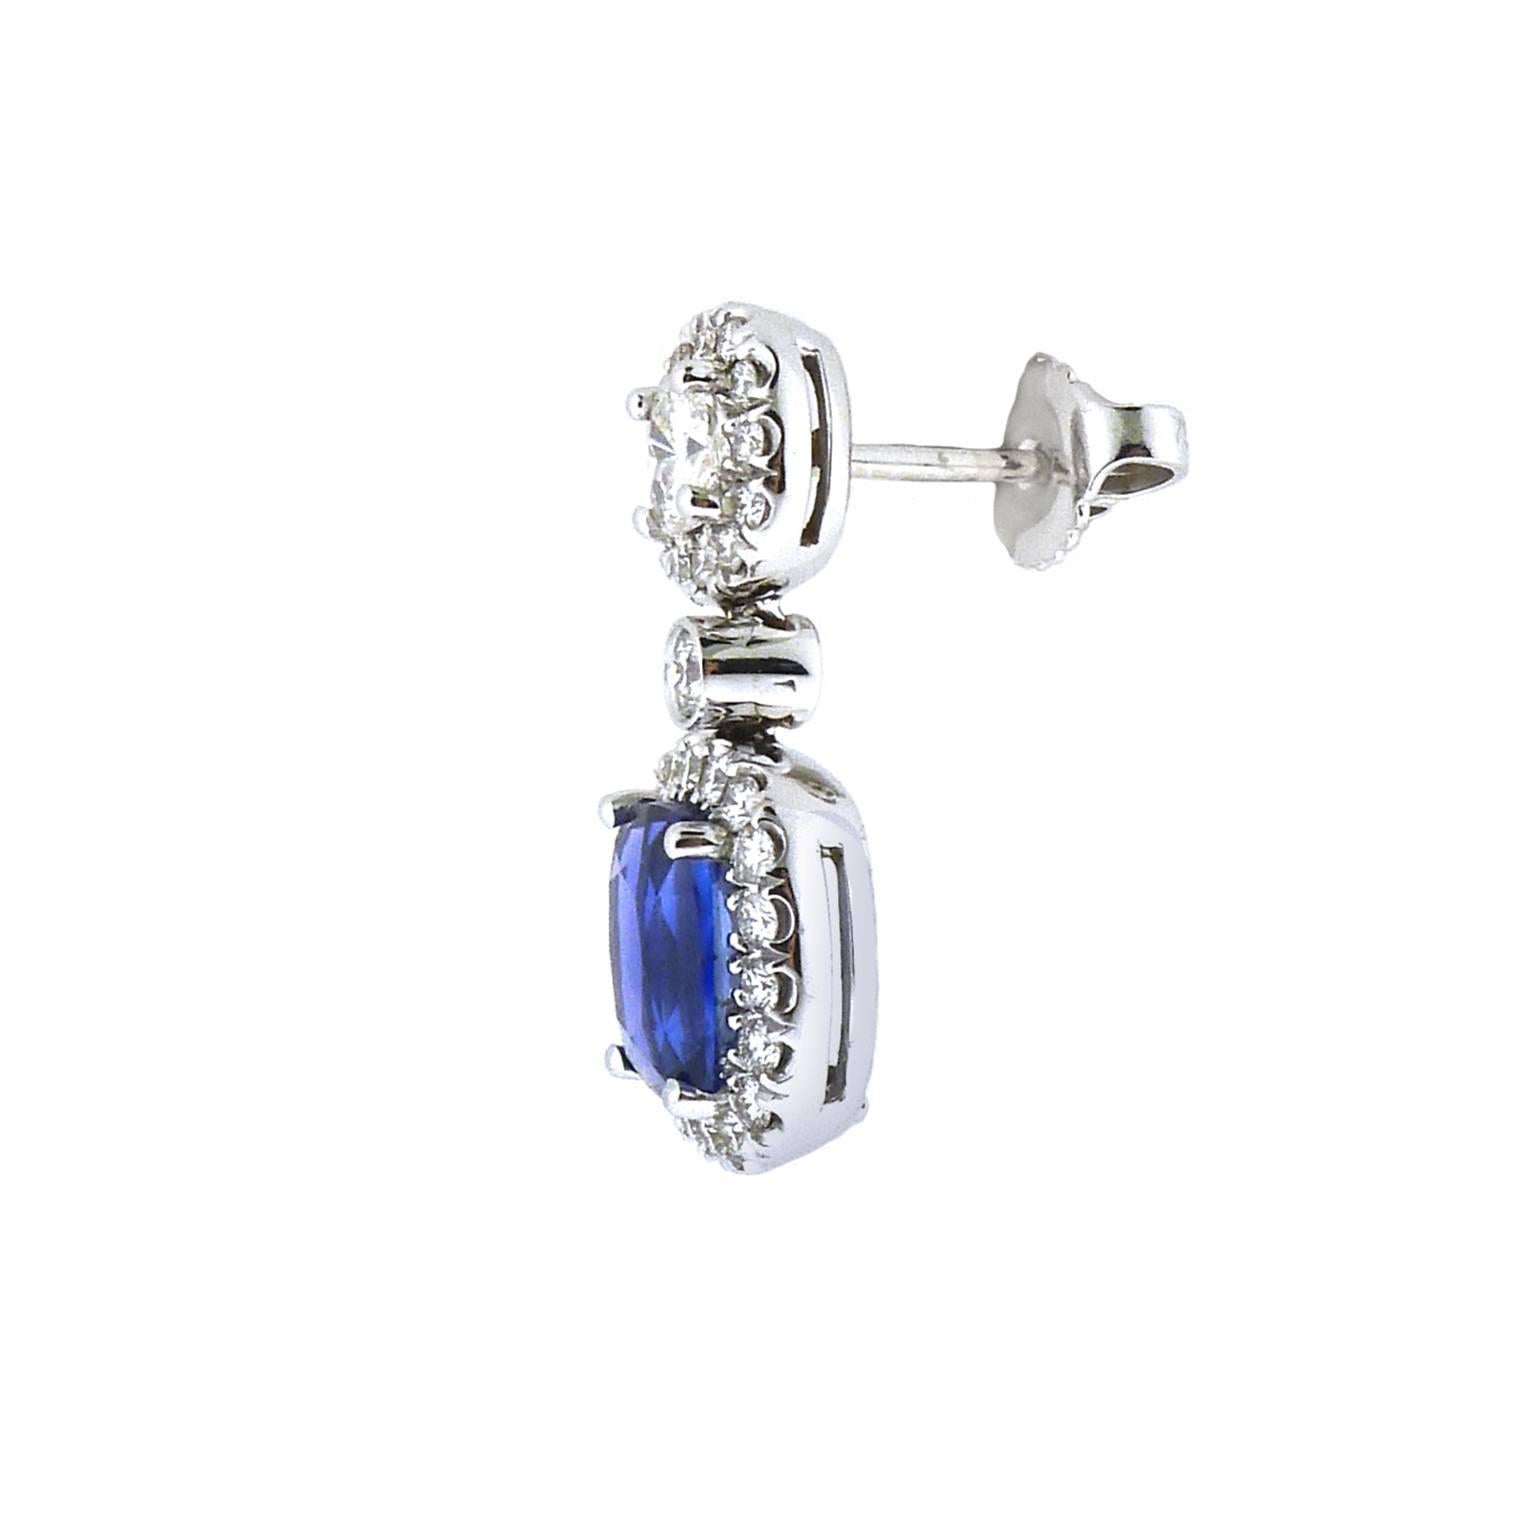 A pair of brilliantly blue, cushion cut sapphires are the centerpiece of these magnificent earrings. The sapphires gracefully drop from two cushion cut diamonds surrounded by a halo of round brilliant cut diamonds.
•Pair of sapphires total 3.43